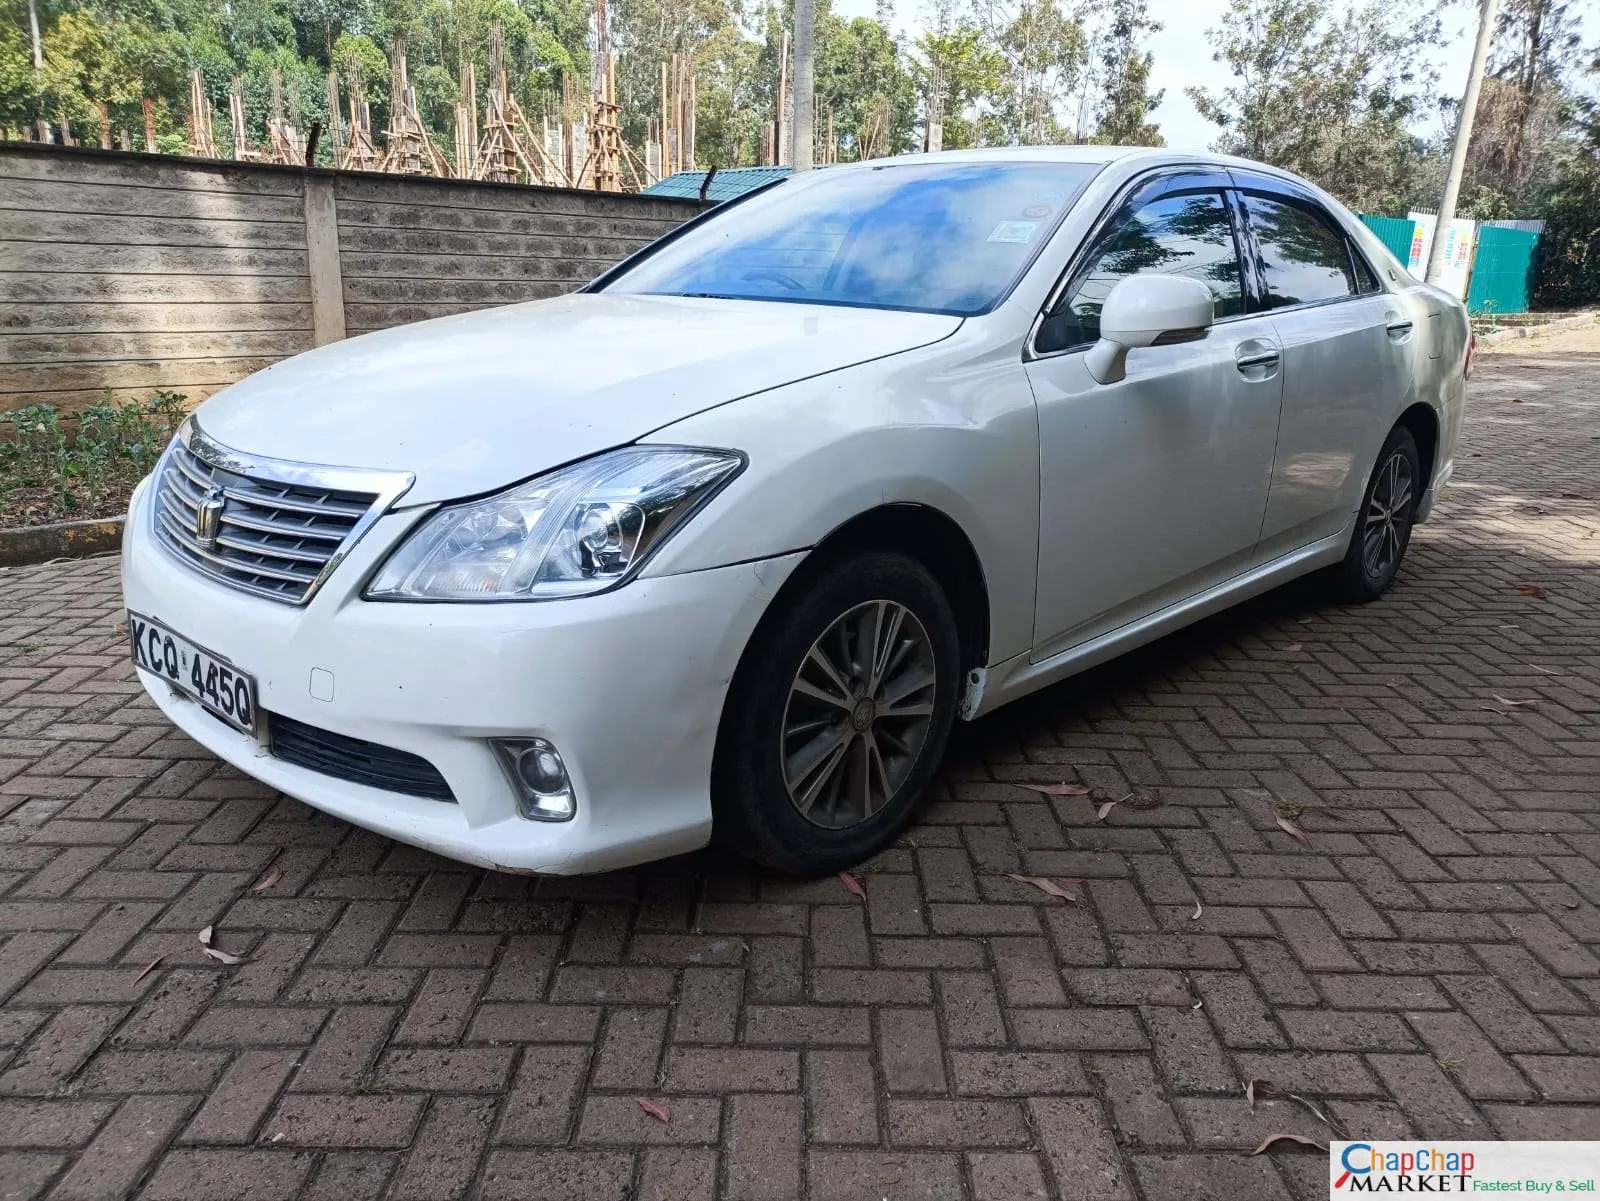 Toyota CROWN kenya Royal Saloon You pay 30% Deposit crown for sale in kenya hire purchase installments Trade in Ok EXCLUSIVE (SOLD)